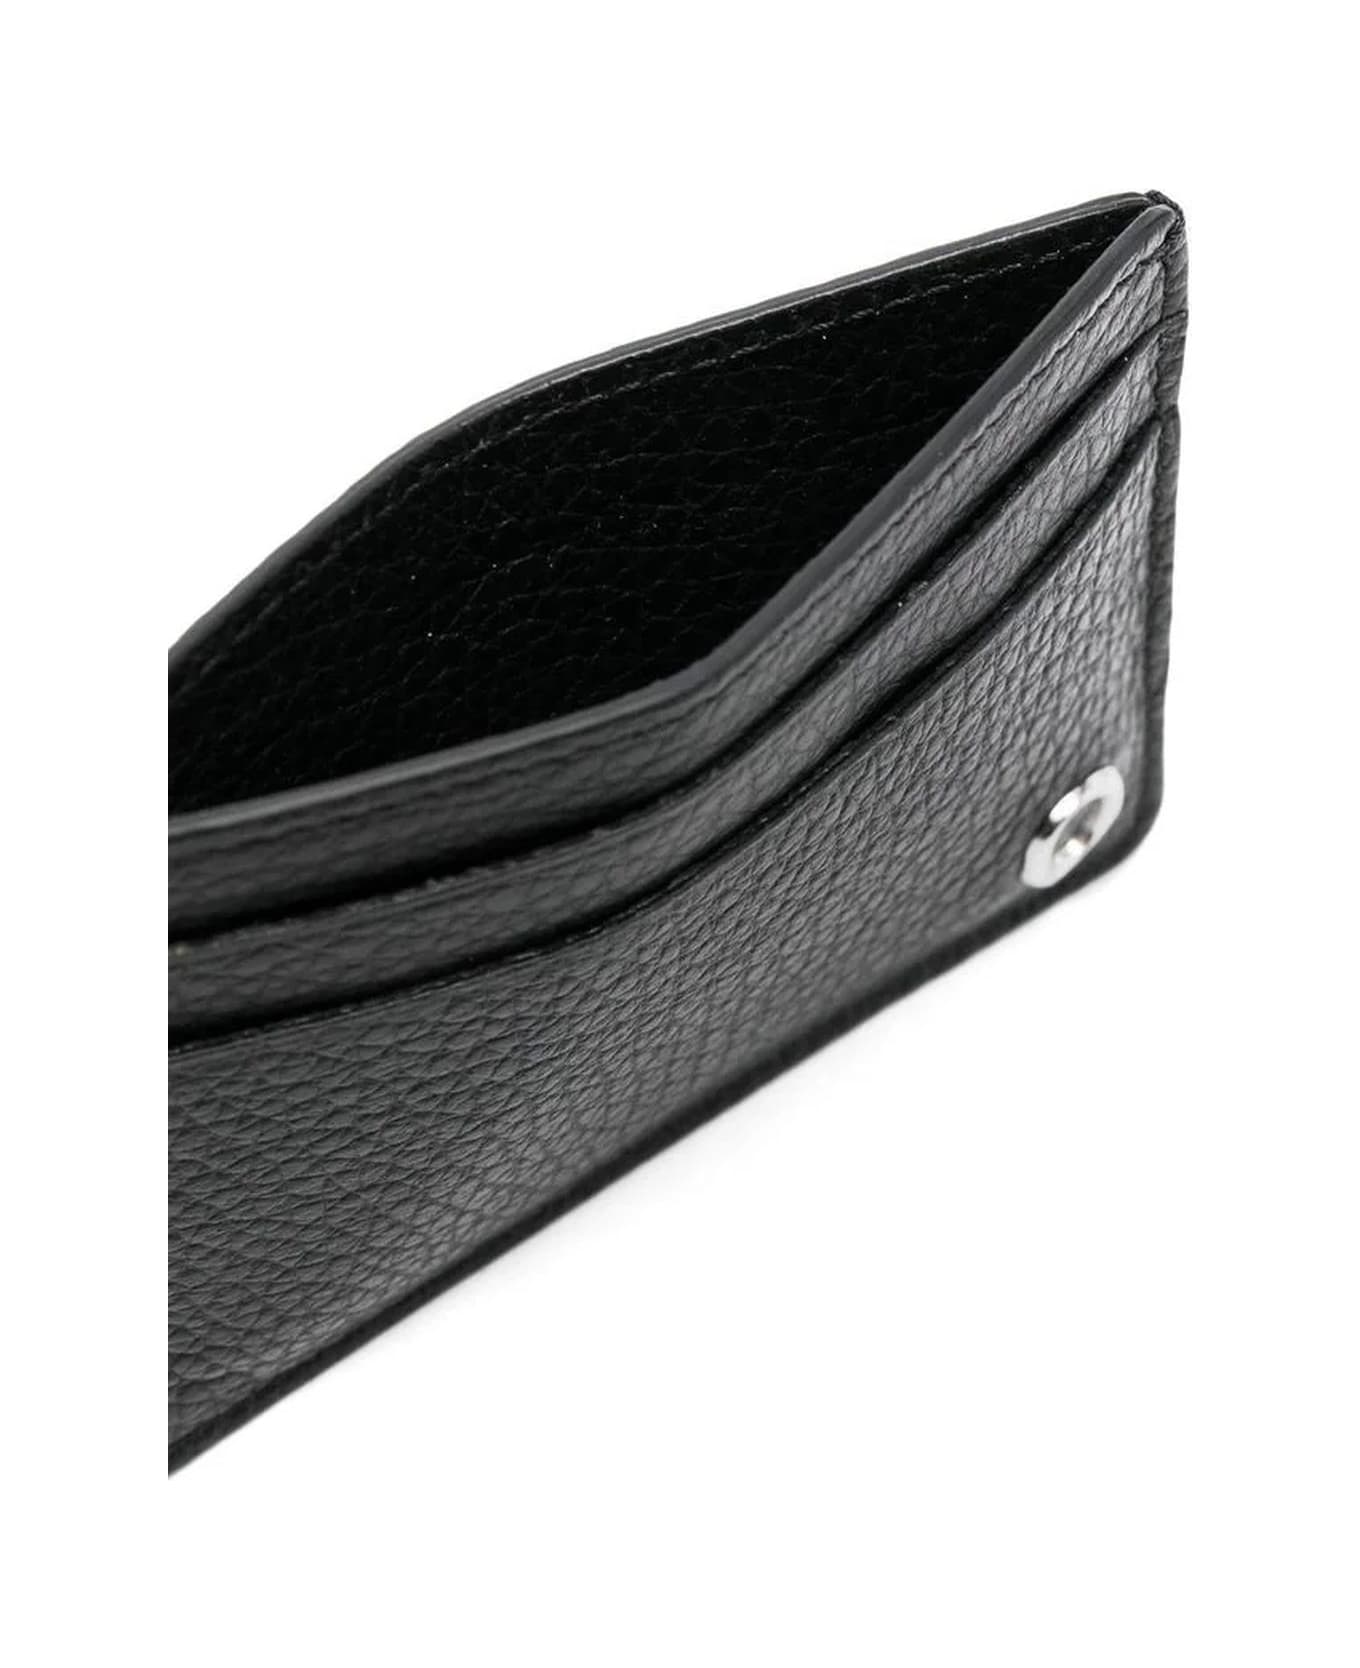 Orciani Micron Leather Card Holder - Black